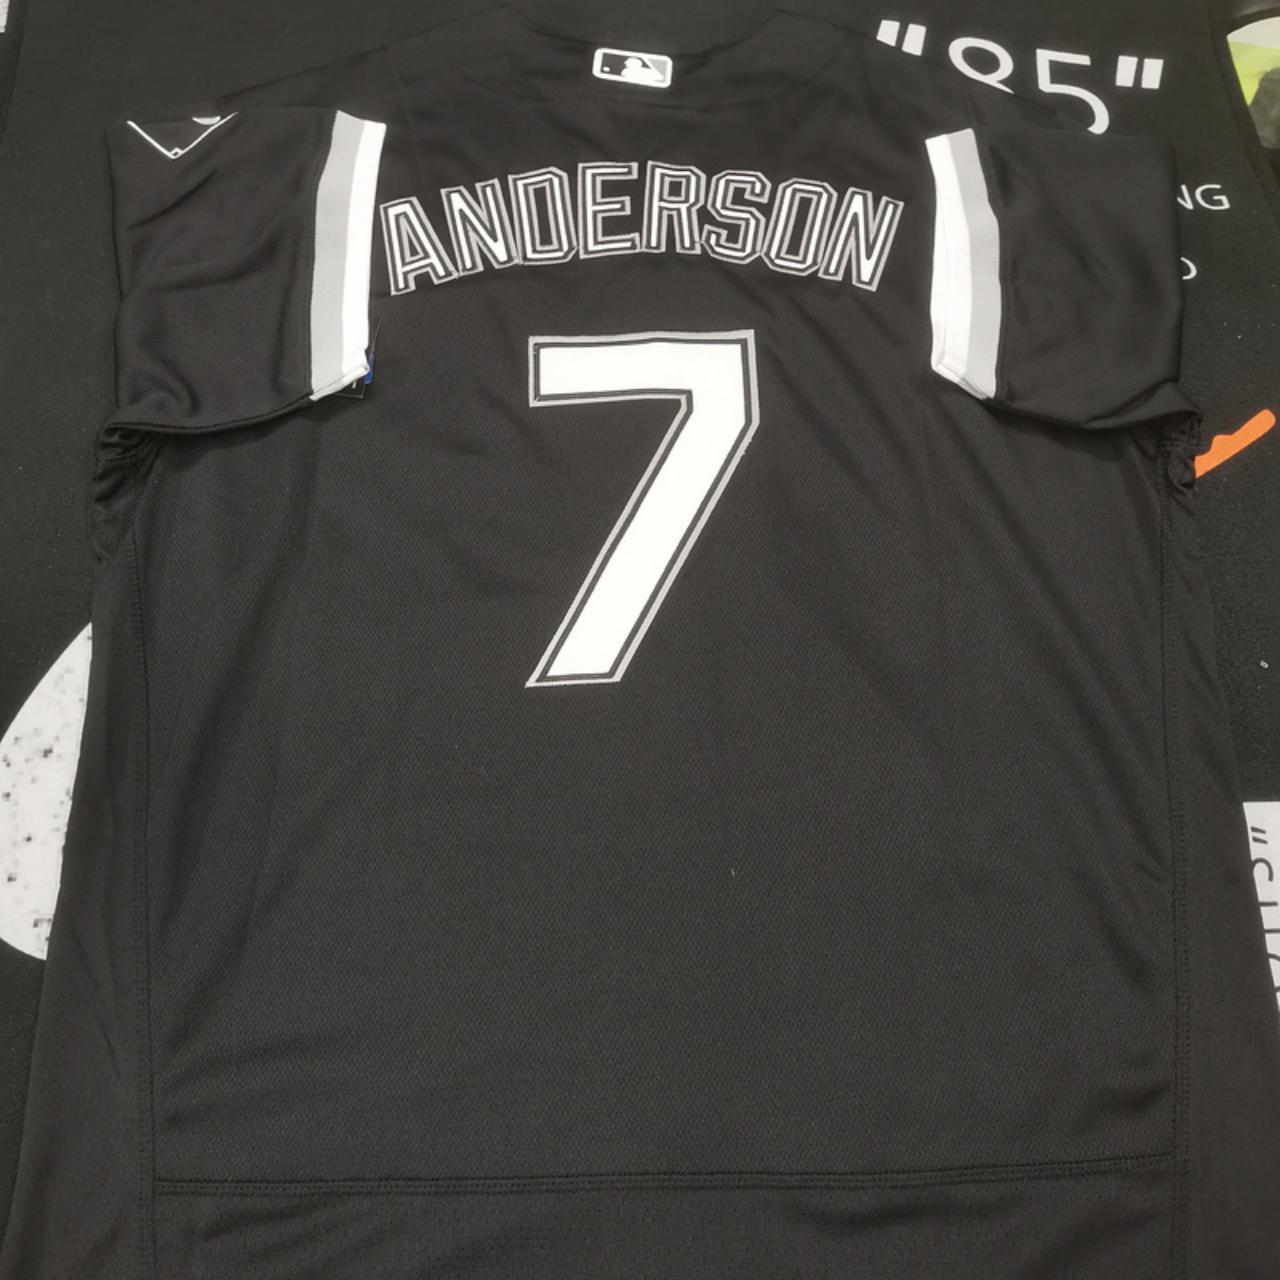 Nike Men's Tim Anderson White and Black Chicago White Sox Home